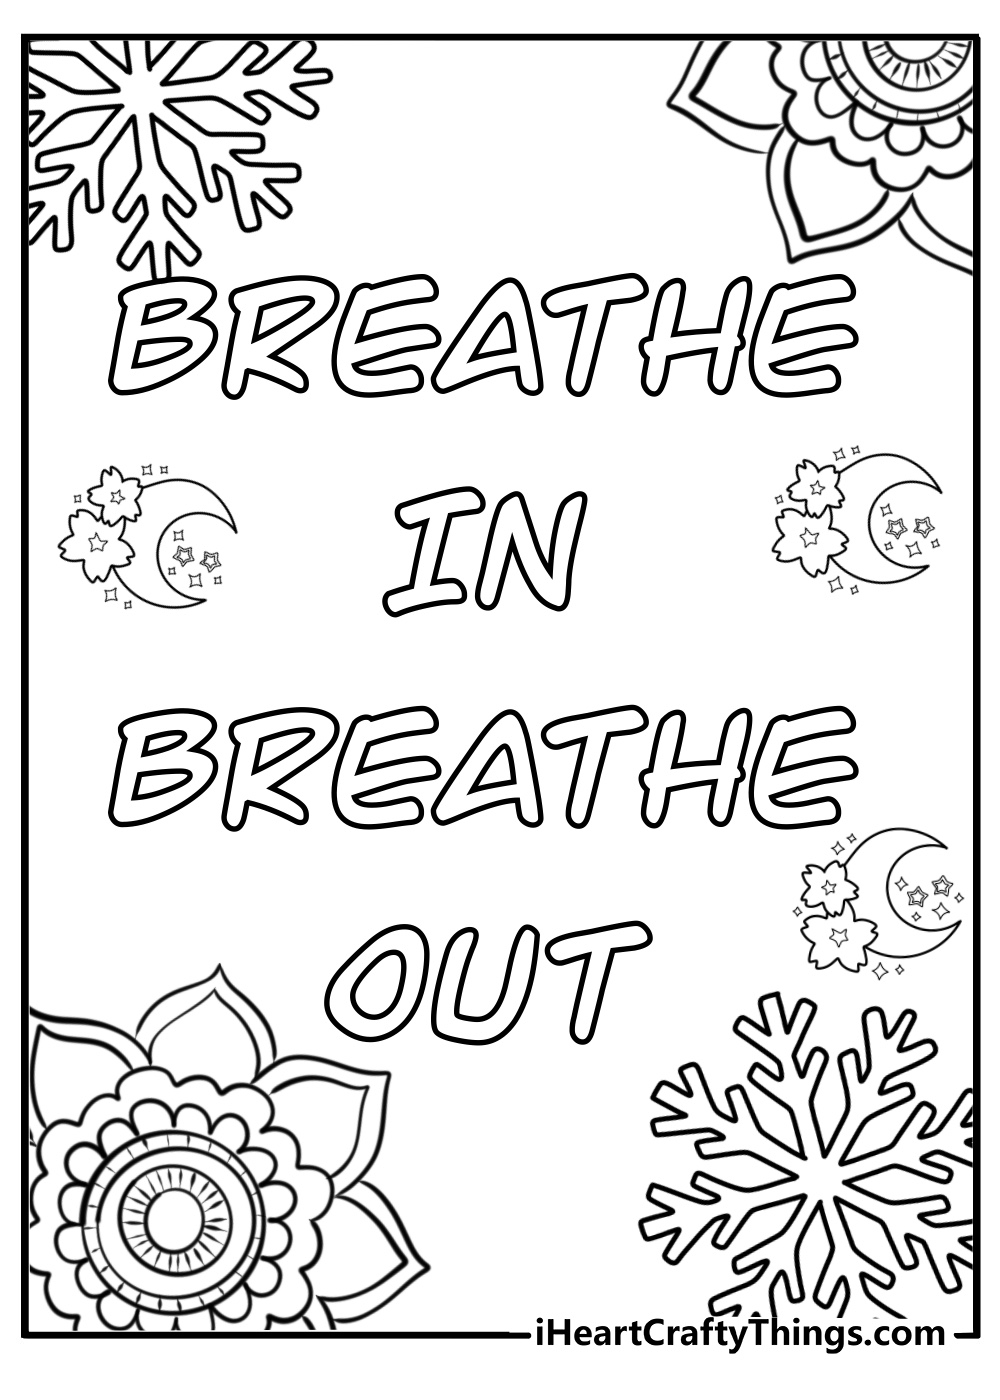 Relaxing adult coloring pages